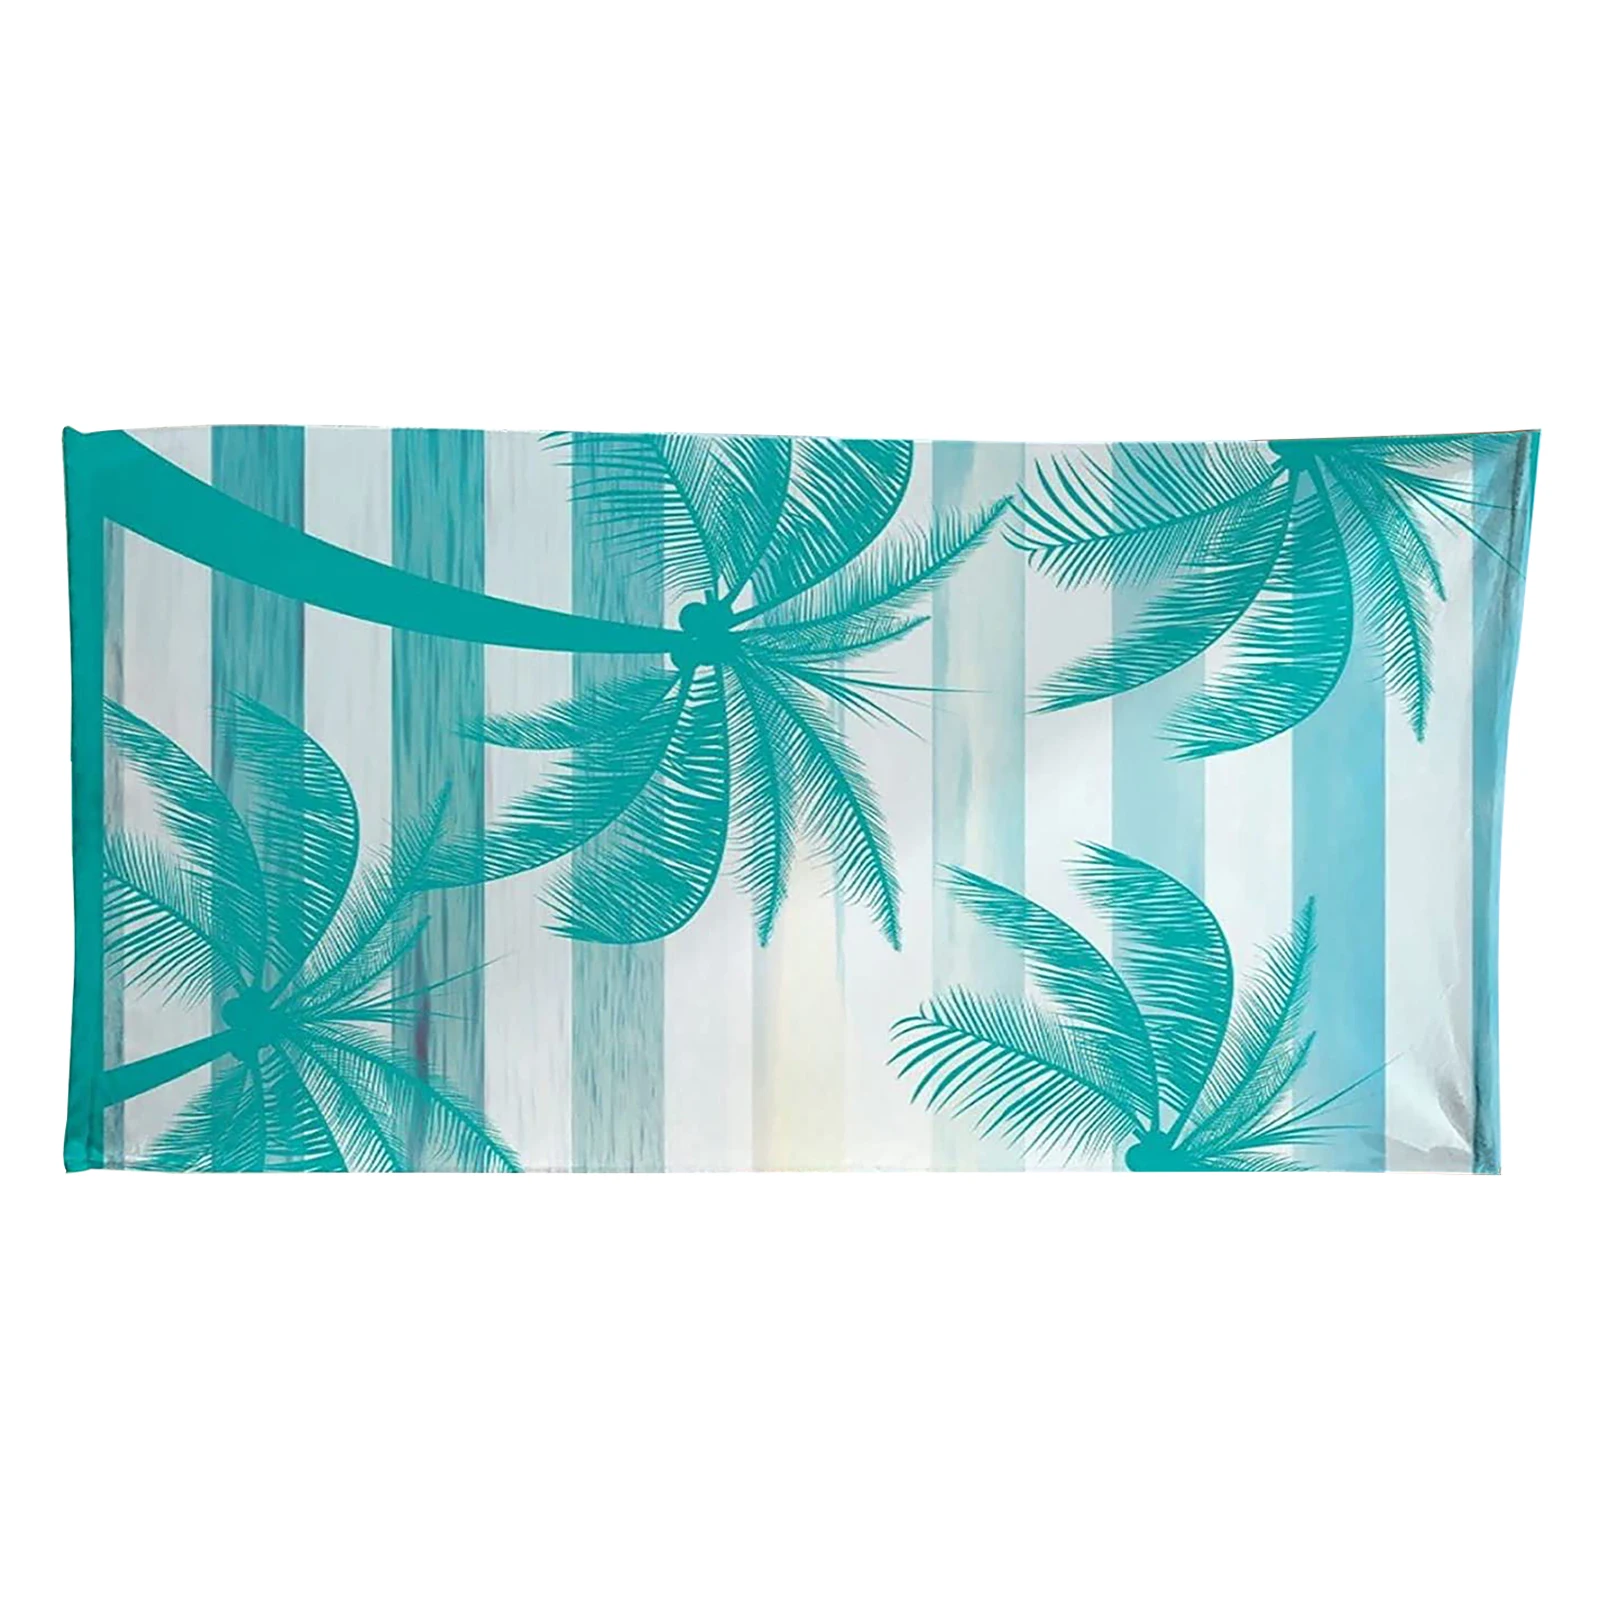 

160x80cm Fashion Swimming Lightweight Beach Towel Bath Travel Large Microfibre Compact Floral Print Soft Super Absorbent Sports